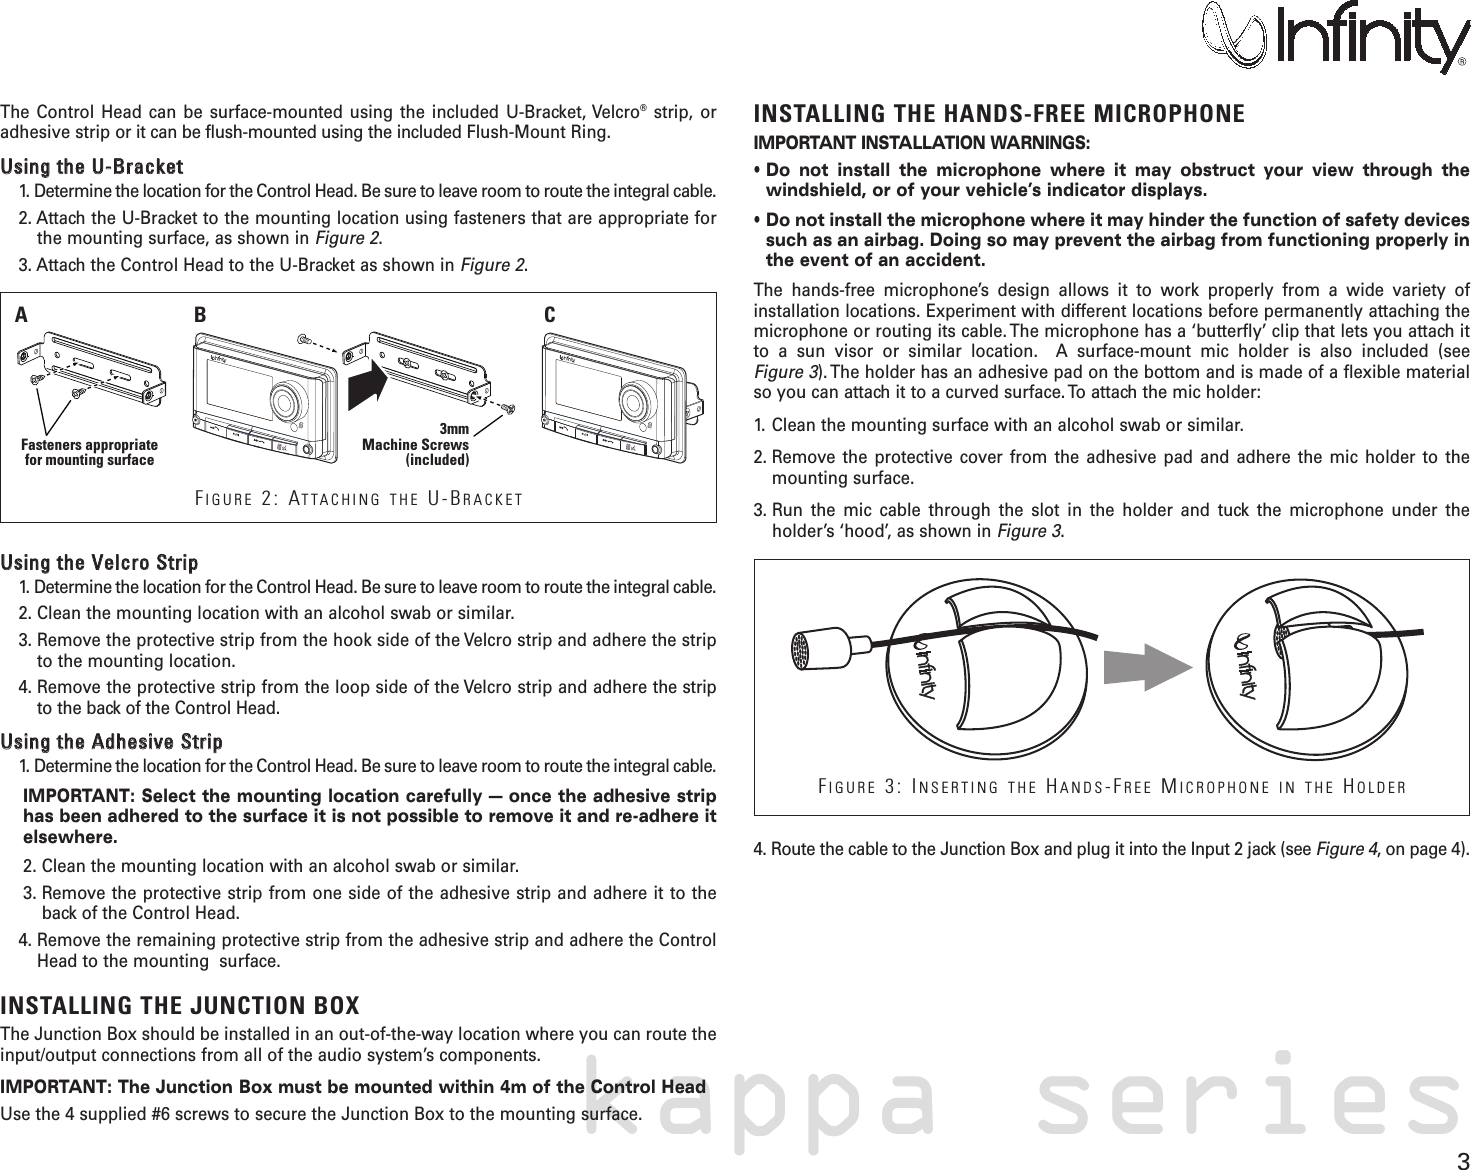 3kappa seriesThe Control Head can be surface-mounted using the included U-Bracket, Velcro®strip, oradhesive strip or it can be flush-mounted using the included Flush-Mount Ring.UUssiinngg  tthhee  UU--BBrraacckkeett    1. Determine the location for the Control Head. Be sure to leave room to route the integral cable.2. Attach the U-Bracket to the mounting location using fasteners that are appropriate forthe mounting surface, as shown in Figure 2.3. Attach the Control Head to the U-Bracket as shown in Figure 2.UUssiinngg  tthhee  VVeellccrroo  SSttrriipp1. Determine the location for the Control Head. Be sure to leave room to route the integral cable.2. Clean the mounting location with an alcohol swab or similar.3. Remove the protective strip from the hook side of the Velcro strip and adhere the stripto the mounting location.4. Remove the protective strip from the loop side of the Velcro strip and adhere the stripto the back of the Control Head.UUssiinngg  tthhee  AAddhheessiivvee  SSttrriipp1. Determine the location for the Control Head. Be sure to leave room to route the integral cable.IMPORTANT: Select the mounting location carefully — once the adhesive striphas been adhered to the surface it is not possible to remove it and re-adhere itelsewhere.2. Clean the mounting location with an alcohol swab or similar.3. Remove the protective strip from one side of the adhesive strip and adhere it to theback of the Control Head.4. Remove the remaining protective strip from the adhesive strip and adhere the ControlHead to the mounting  surface. INSTALLING THE JUNCTION BOXThe Junction Box should be installed in an out-of-the-way location where you can route theinput/output connections from all of the audio system’s components. IMPORTANT: The Junction Box must be mounted within 4m of the Control HeadUse the 4 supplied #6 screws to secure the Junction Box to the mounting surface.INSTALLING THE HANDS-FREE MICROPHONEIMPORTANT INSTALLATION WARNINGS:• Do not install the microphone where it may obstruct your view through thewindshield, or of your vehicle’s indicator displays.• Do not install the microphone where it may hinder the function of safety devicessuch as an airbag. Doing so may prevent the airbag from functioning properly inthe event of an accident.The hands-free microphone’s design allows it to work properly from a wide variety of installation locations. Experiment with different locations before permanently attaching themicrophone or routing its cable. The microphone has a ‘butterfly’ clip that lets you attach itto a sun visor or similar location.  A surface-mount mic holder is also included (see Figure 3). The holder has an adhesive pad on the bottom and is made of a flexible materialso you can attach it to a curved surface. To attach the mic holder:1. Clean the mounting surface with an alcohol swab or similar.2. Remove the protective cover from the adhesive pad and adhere the mic holder to themounting surface.3. Run the mic cable through the slot in the holder and tuck the microphone under the holder’s ‘hood’, as shown in Figure 3.4. Route the cable to the Junction Box and plug it into the Input 2 jack (see Figure 4, on page 4). 3mmMachine Screws(included)Fasteners appropriatefor mounting surfaceAB CFIGURE 2: ATTACHING THE U-BRACKETFIGURE 3: INSERTING THE HANDS-FREE MICROPHONE IN THE HOLDER